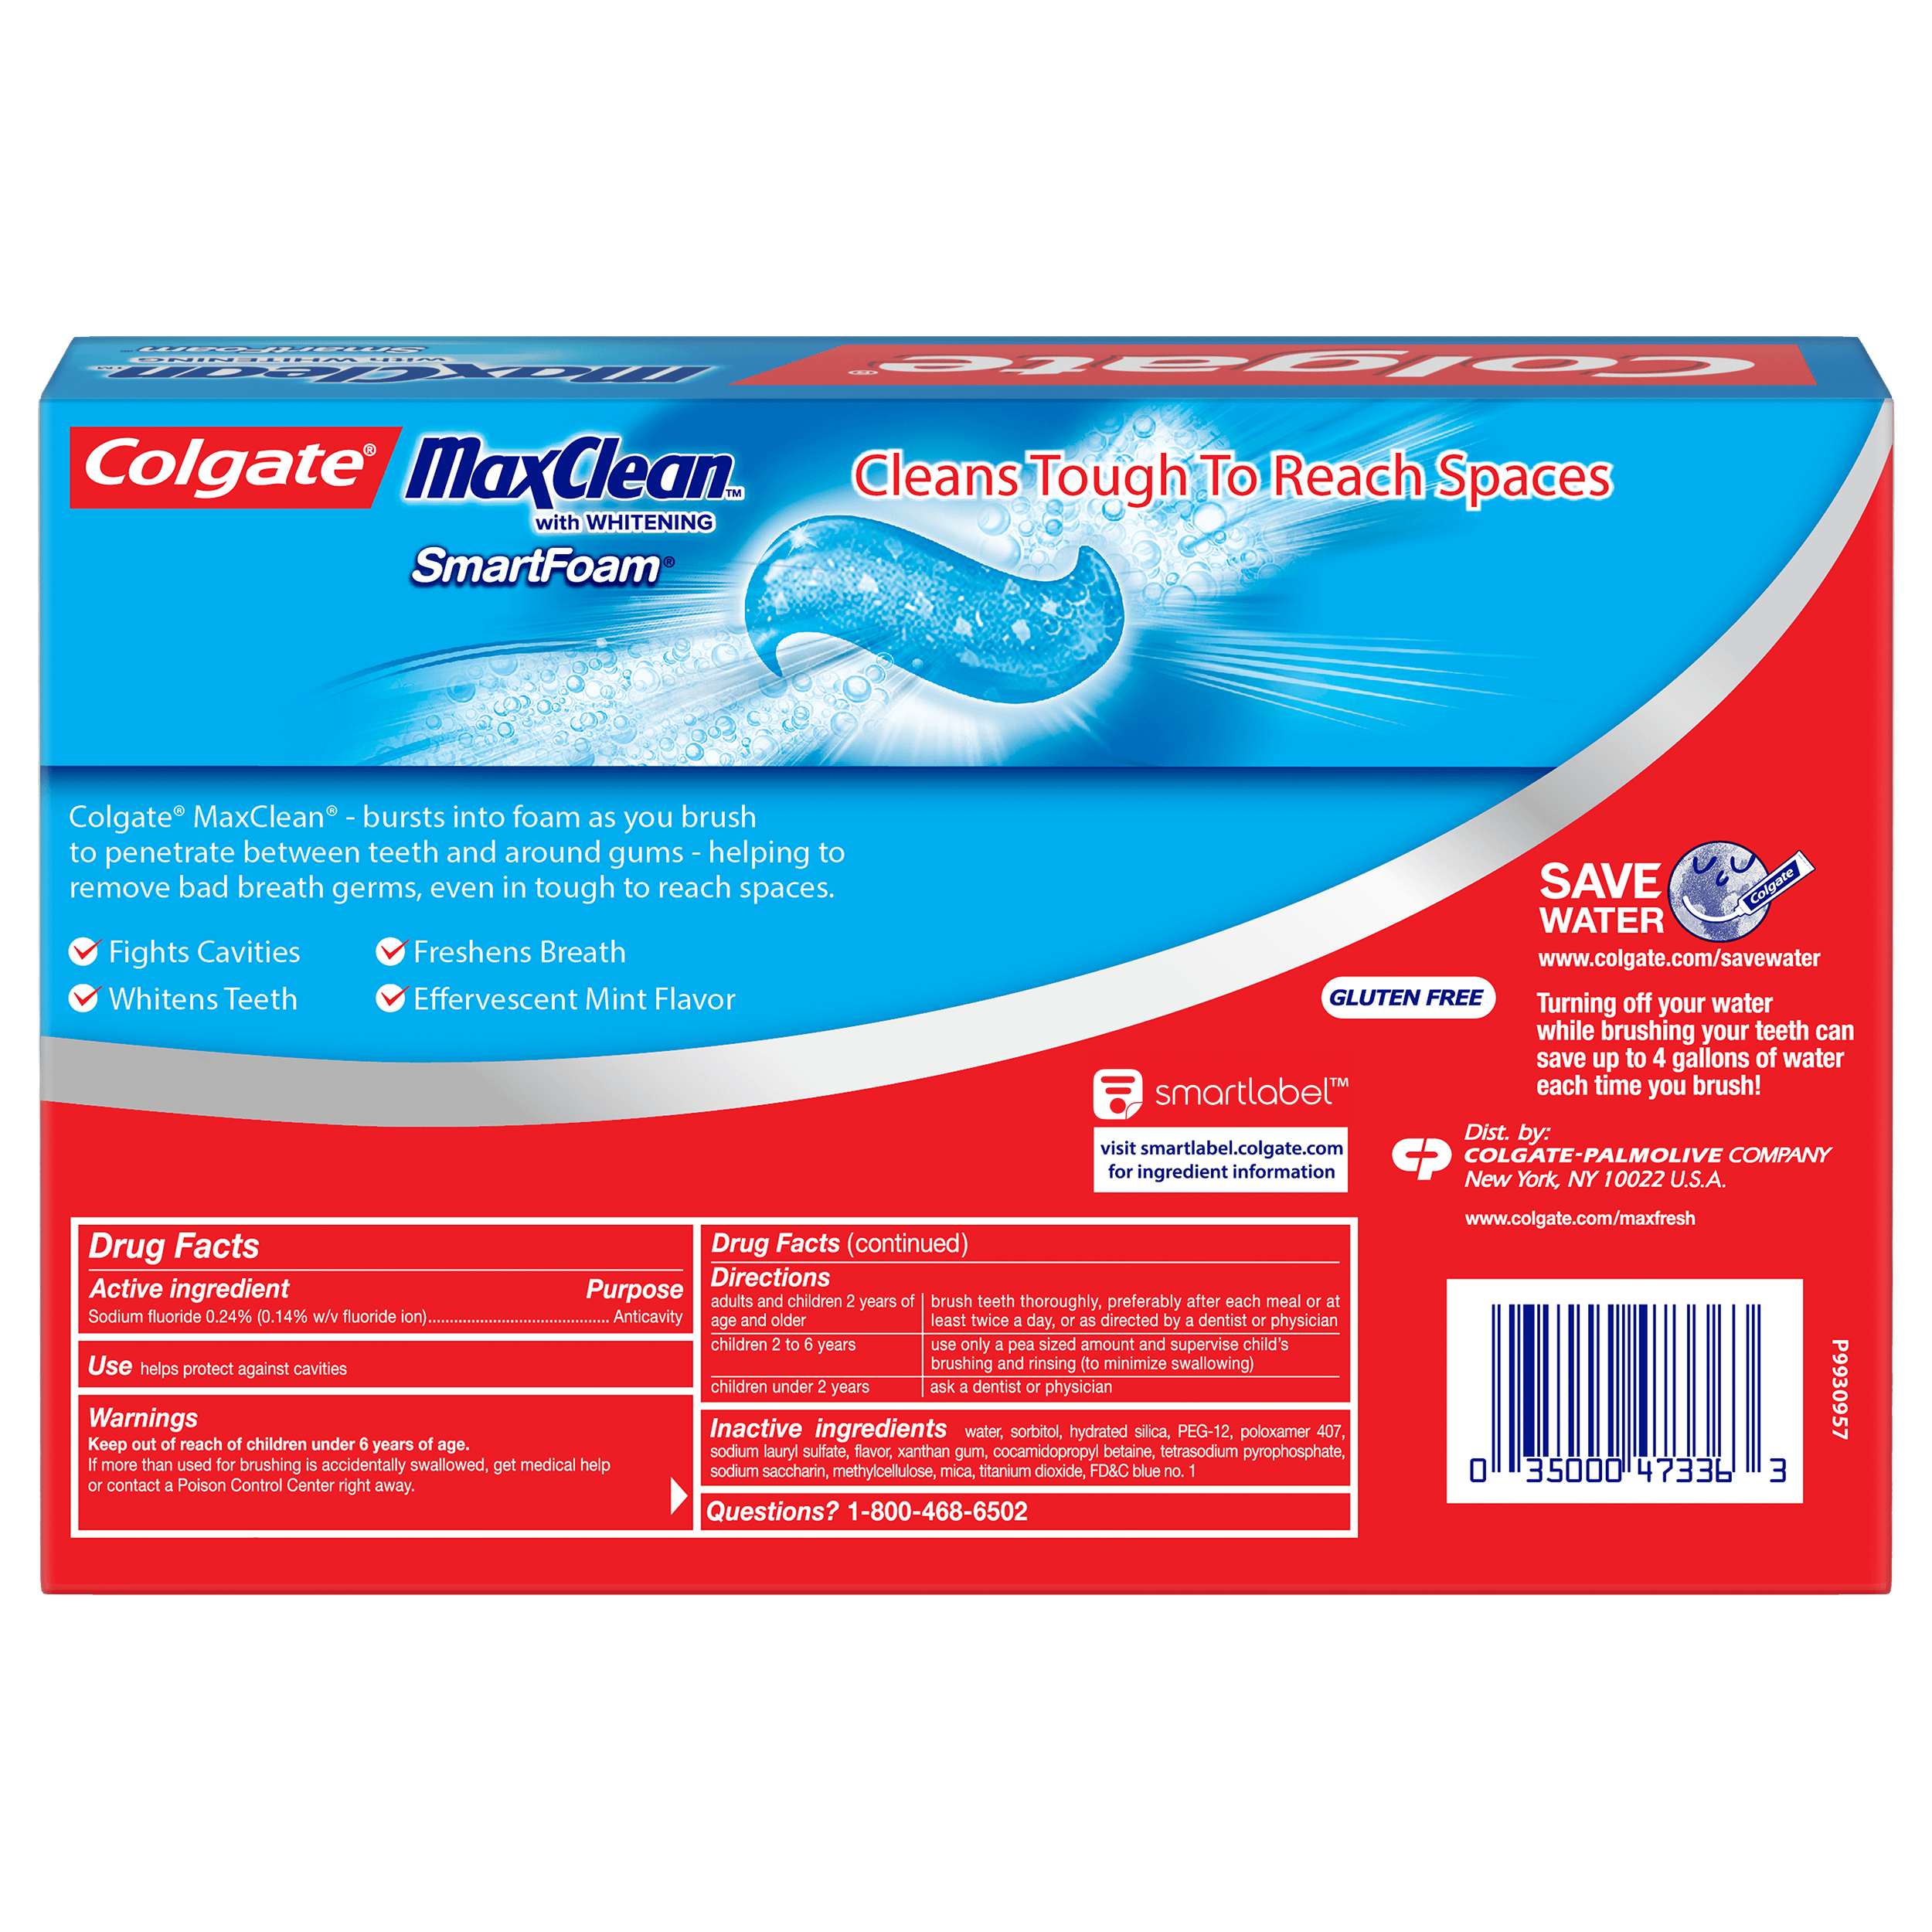 Colgate MaxClean SmartFoam Toothpaste Effervescent Mint - 6.0 Ounce (3 Pack) - image 5 of 12